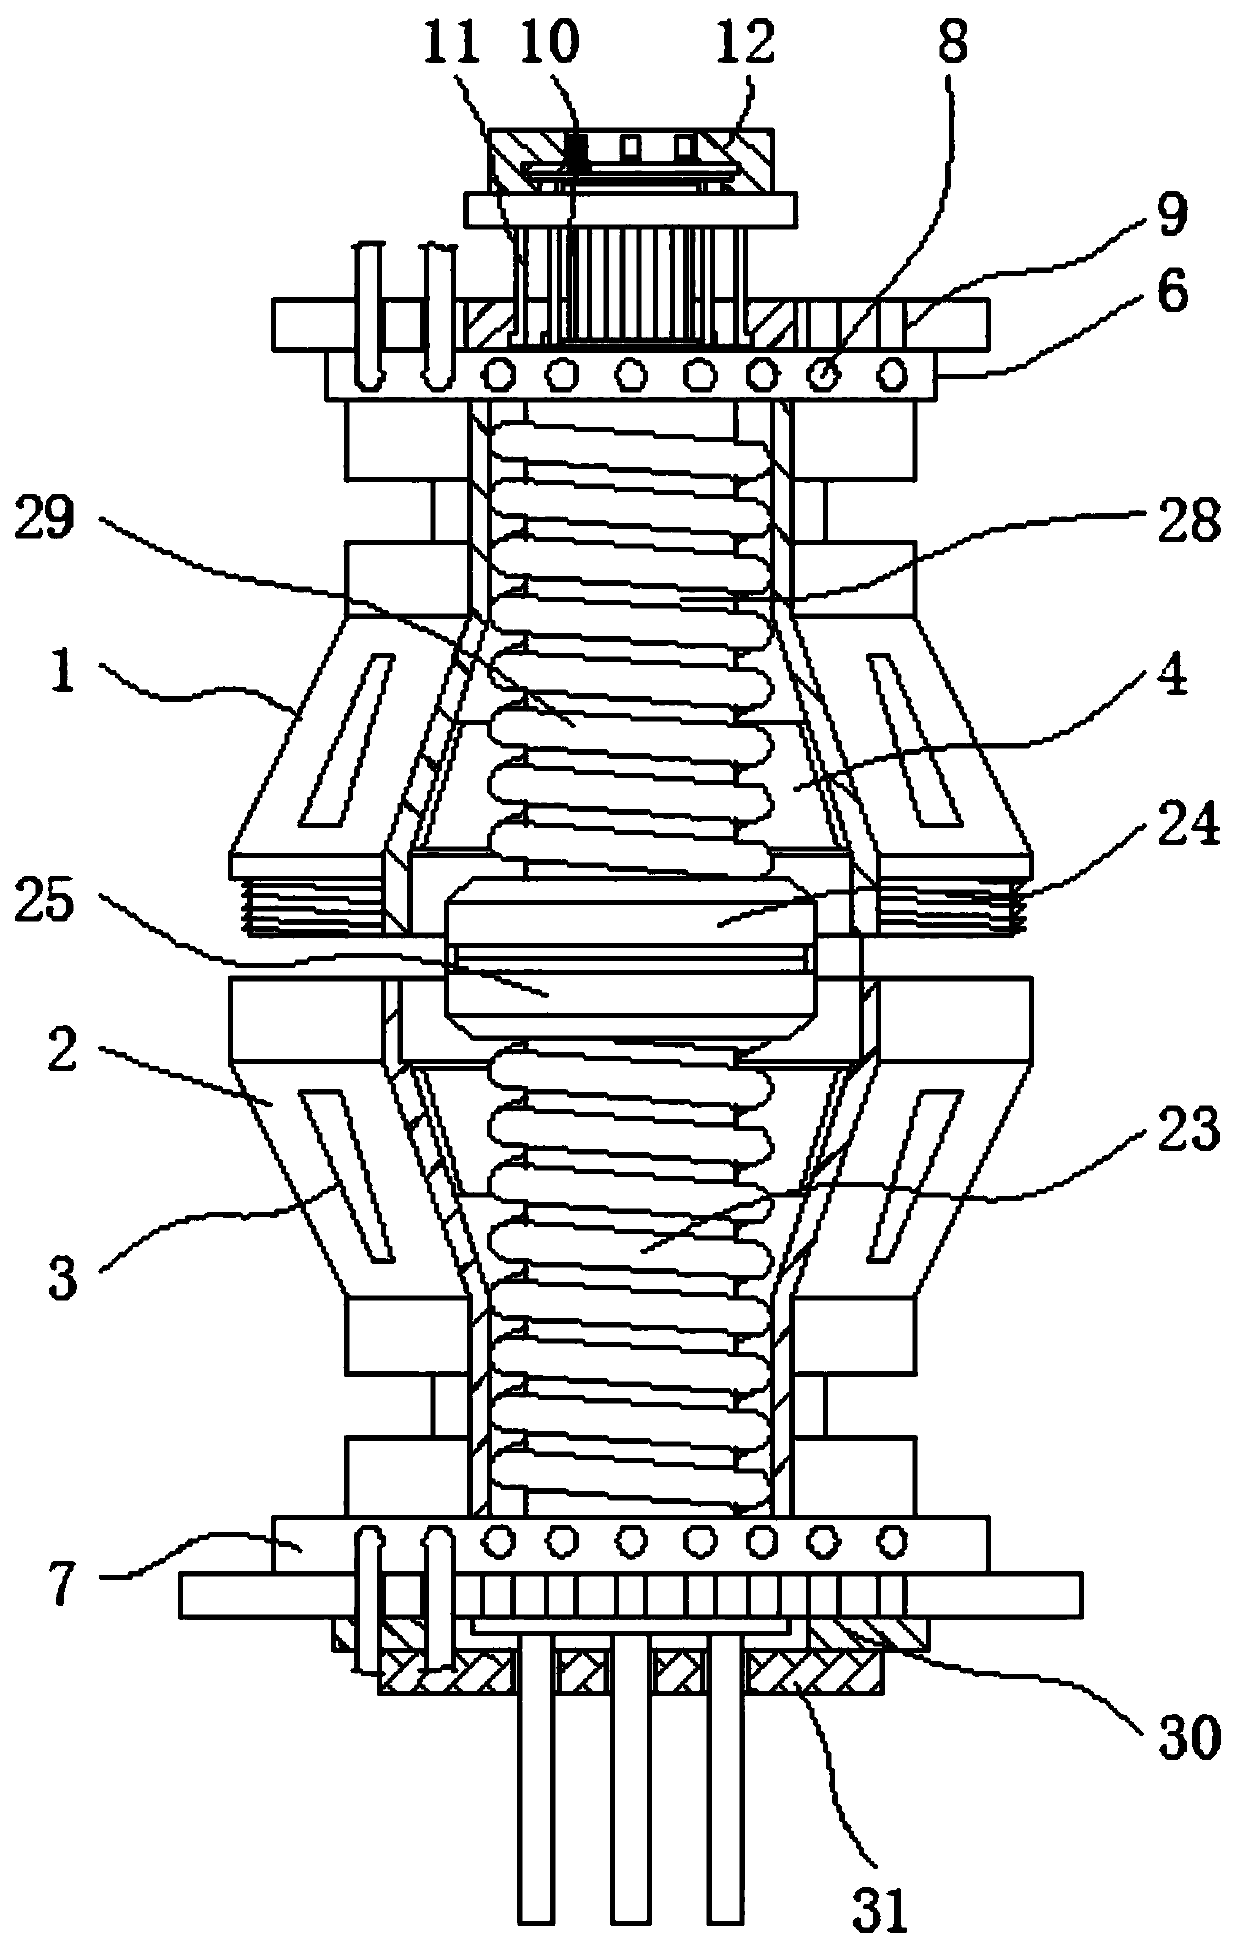 An engineering optical cable conductor with an intermediate joint structure